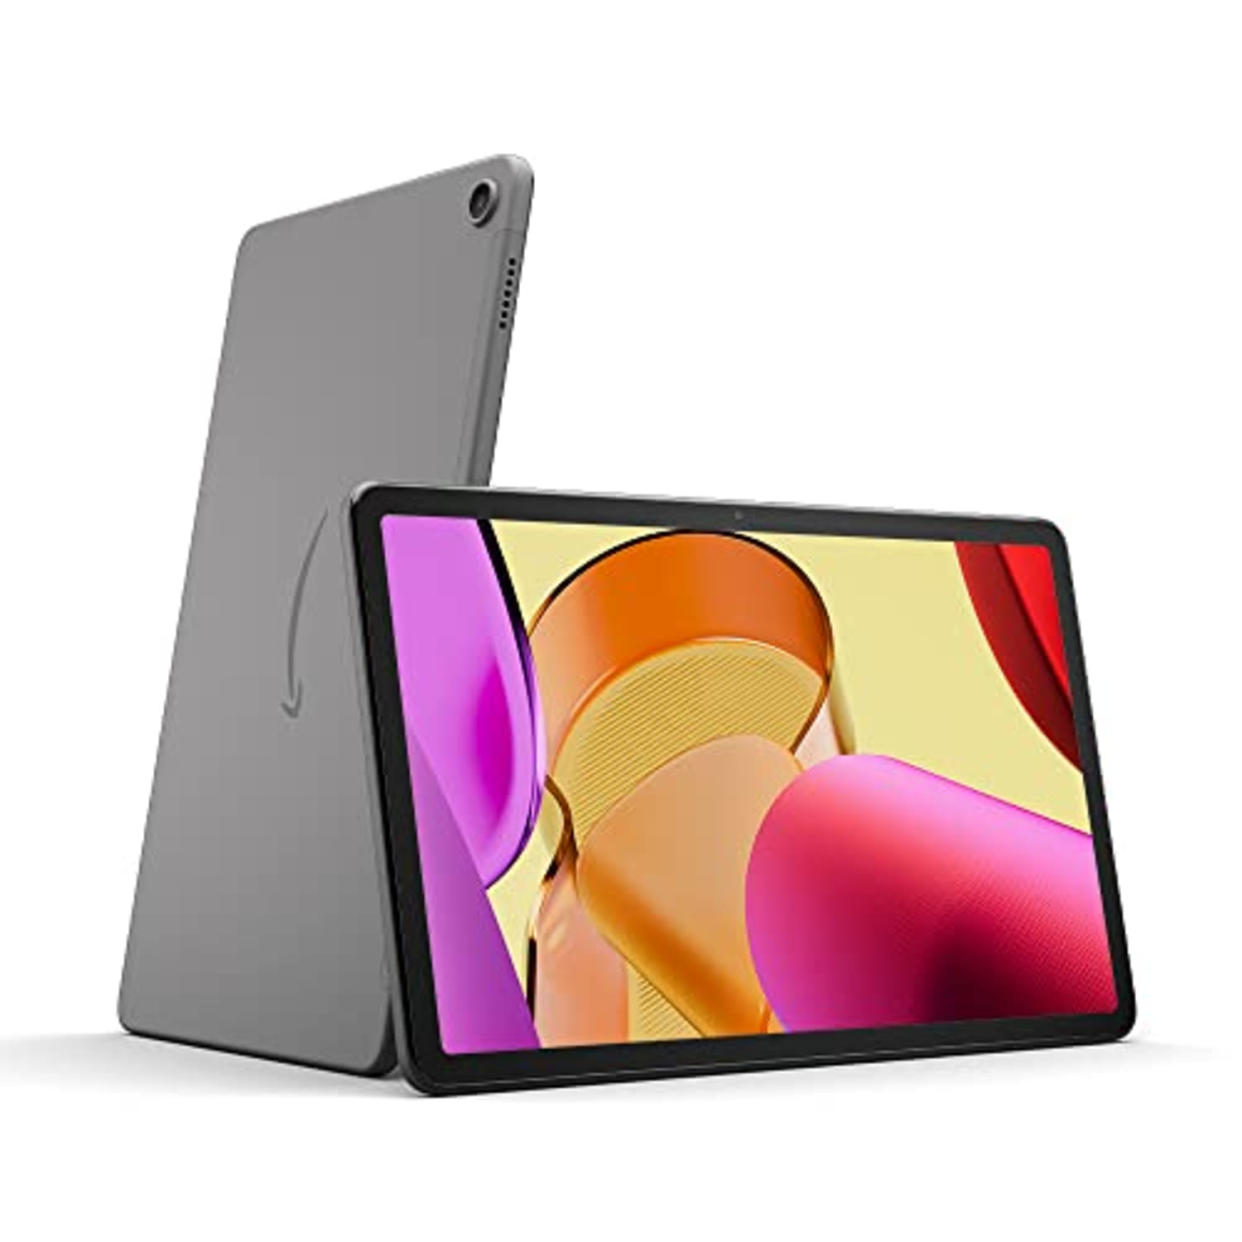 Introducing Amazon Fire Max 11 tablet, our most powerful tablet yet, vivid 11